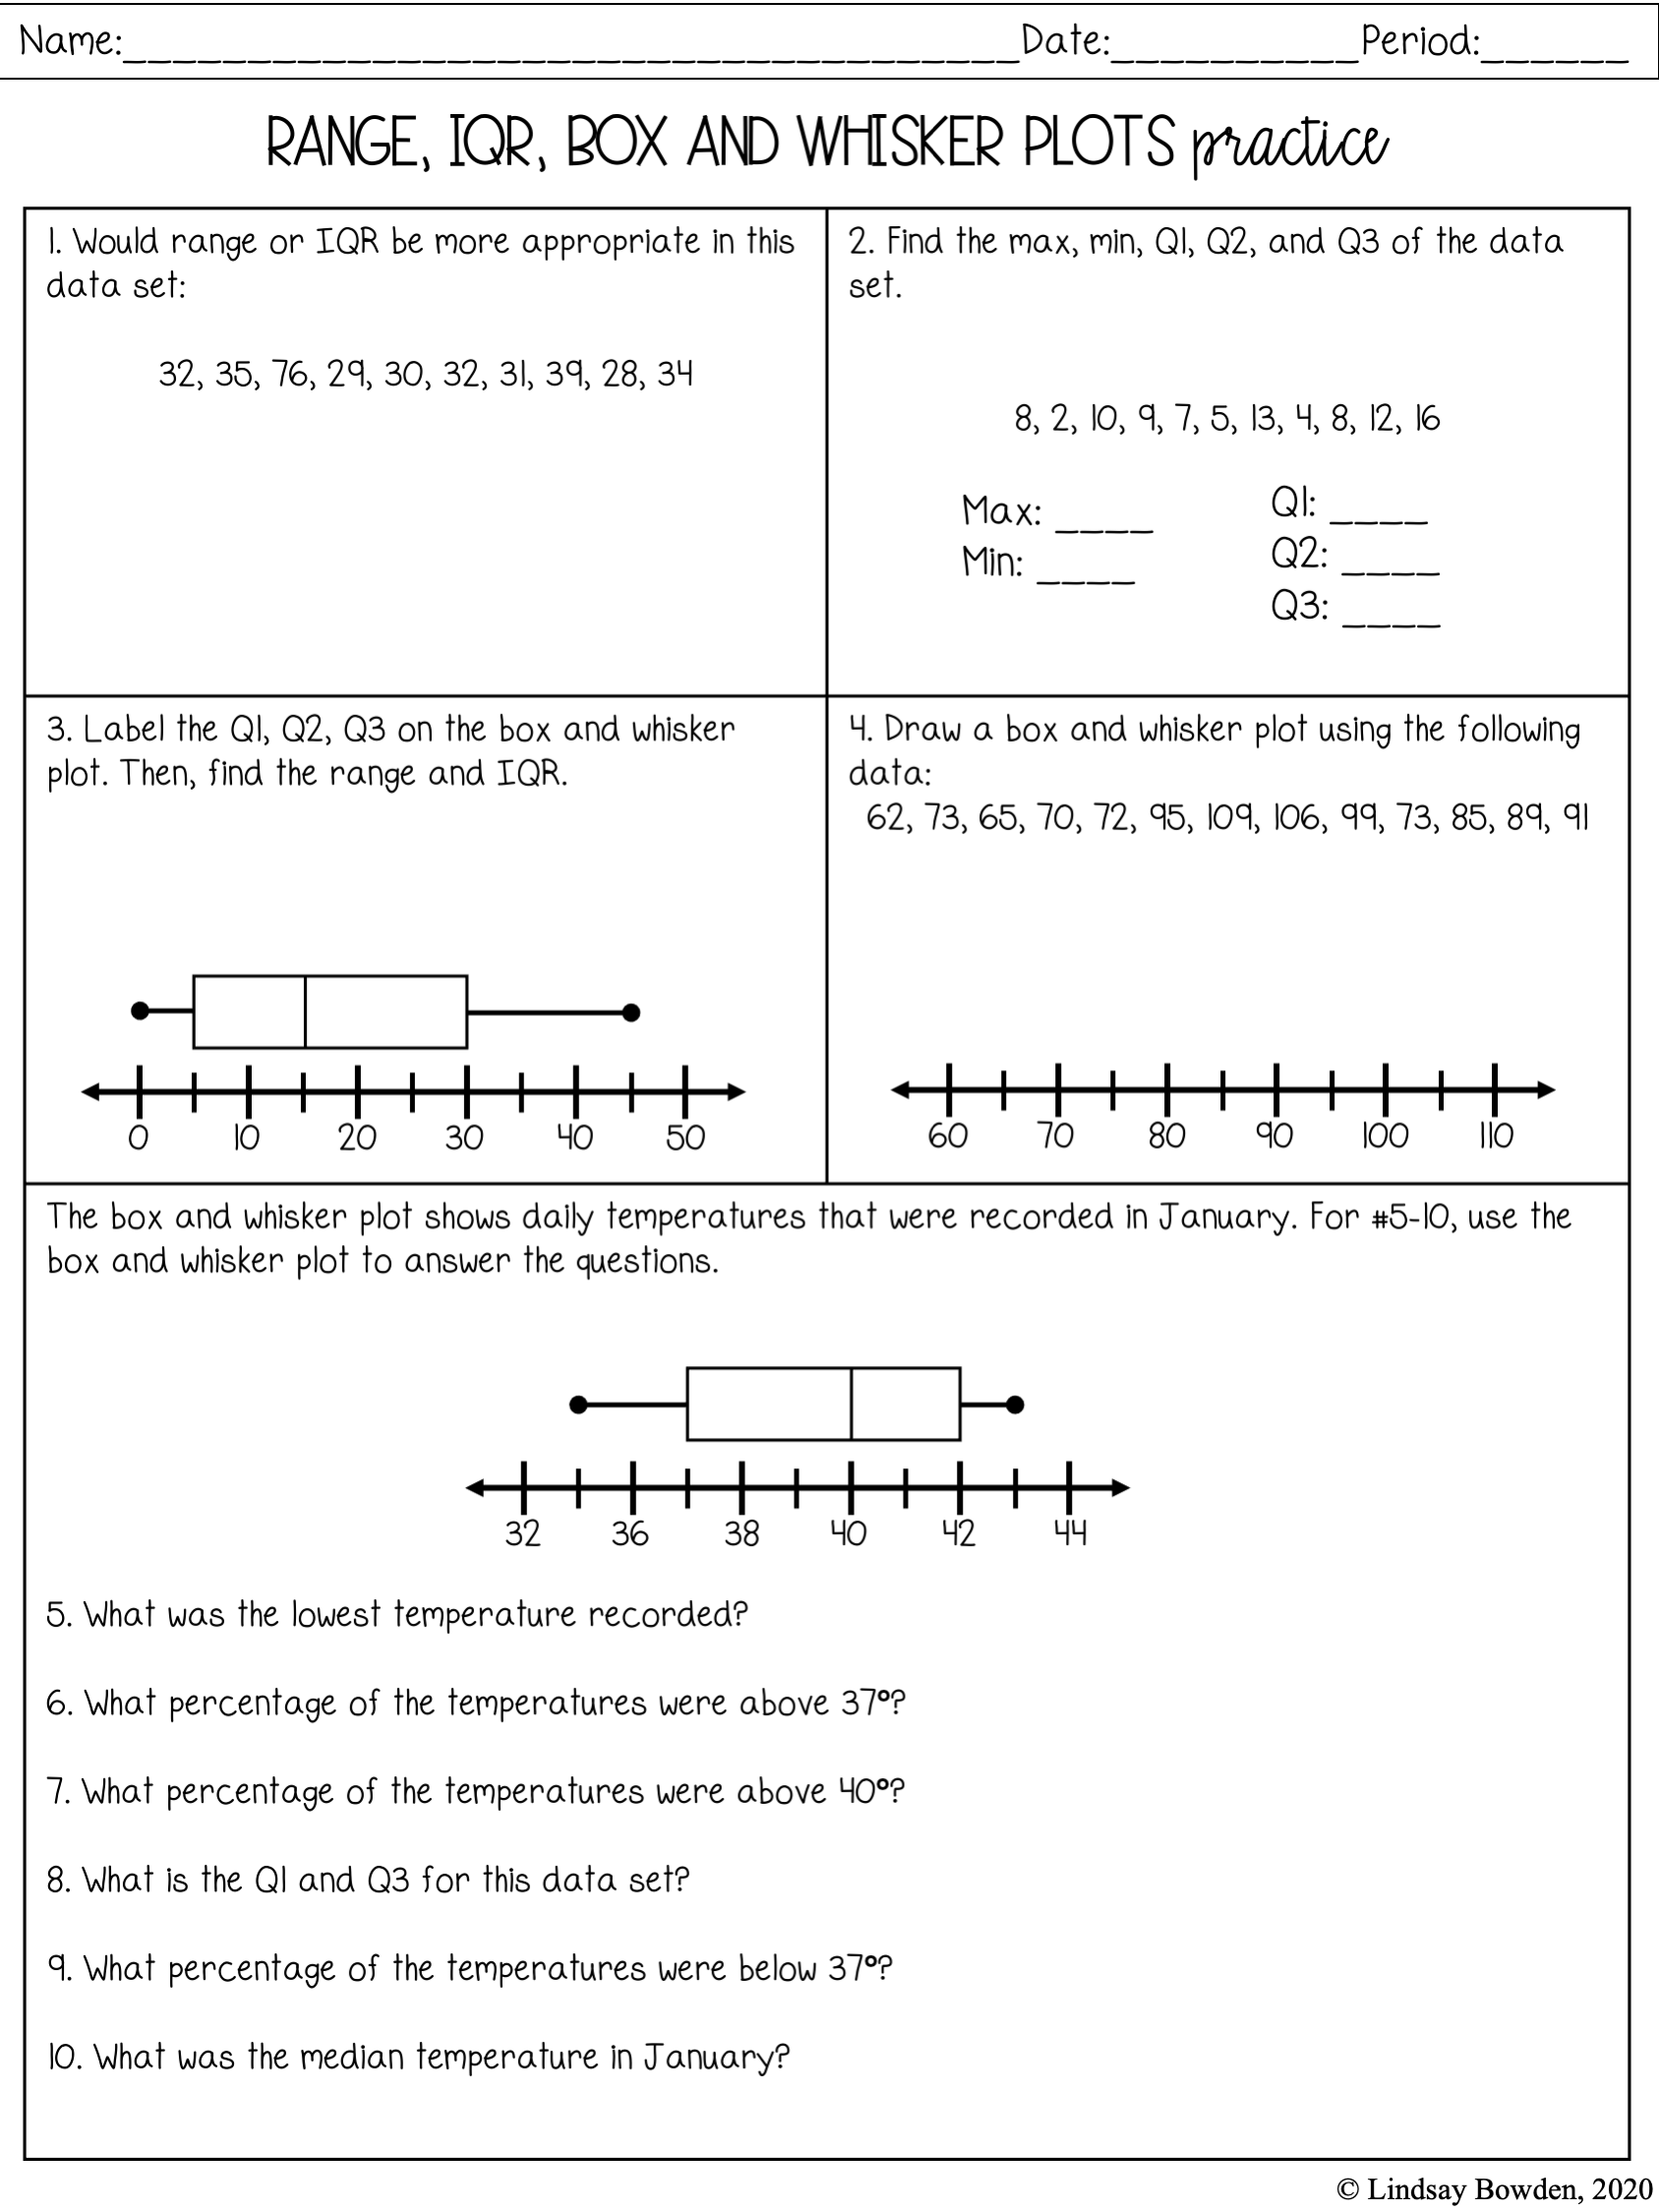 Box and Whisker Plots Notes and Worksheets - Lindsay Bowden Regarding Box And Whisker Plot Worksheet